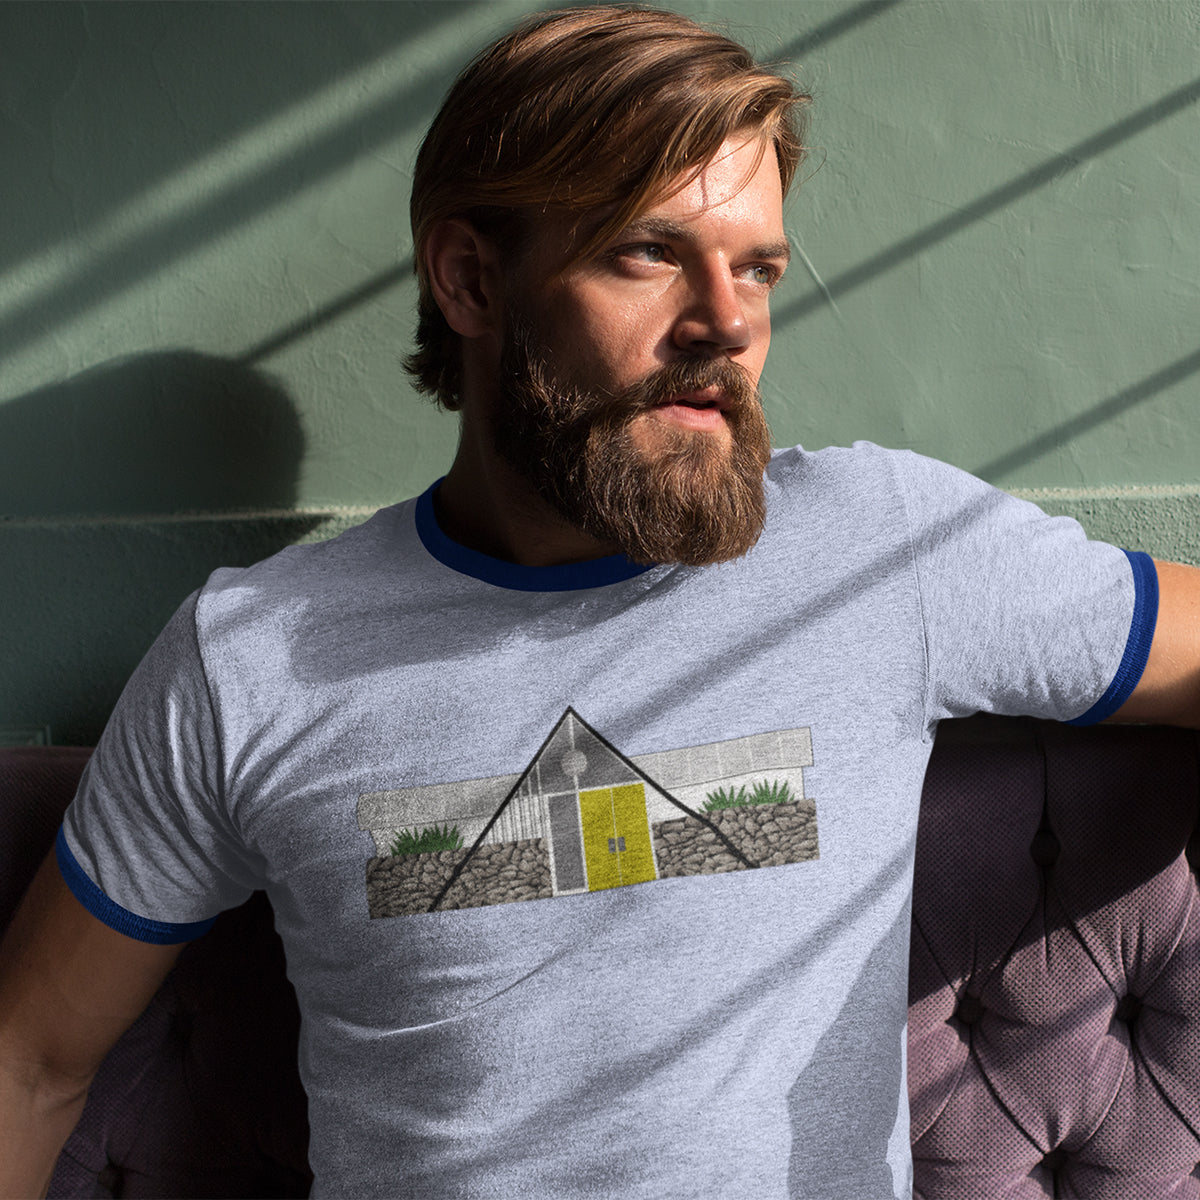 Man with beard sitting on couch looking out the window wearing ringer blue T-shirt.